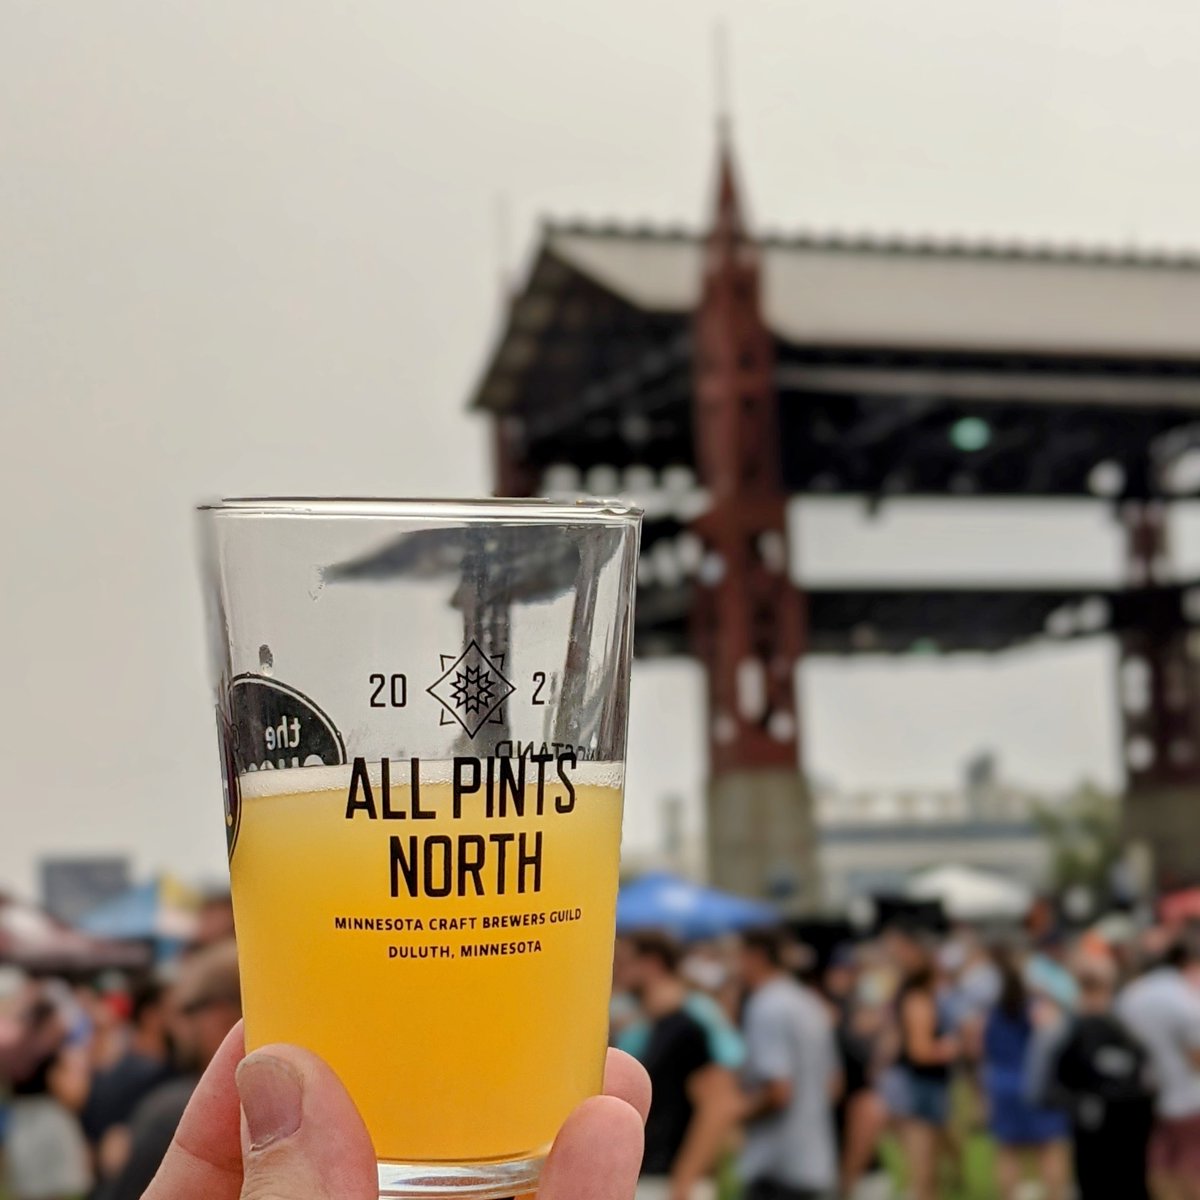 @mncraftbrew's #AllPintsNorth is one of our favorite beer festivals of the year, and it's going on today from 3-7pm at Bayfront Festival Park in Duluth!
You can find us in booth 77, next to our friends at @HackamoreBrewCo & @LakeMonsterBrew!
Can't wait to see you there!